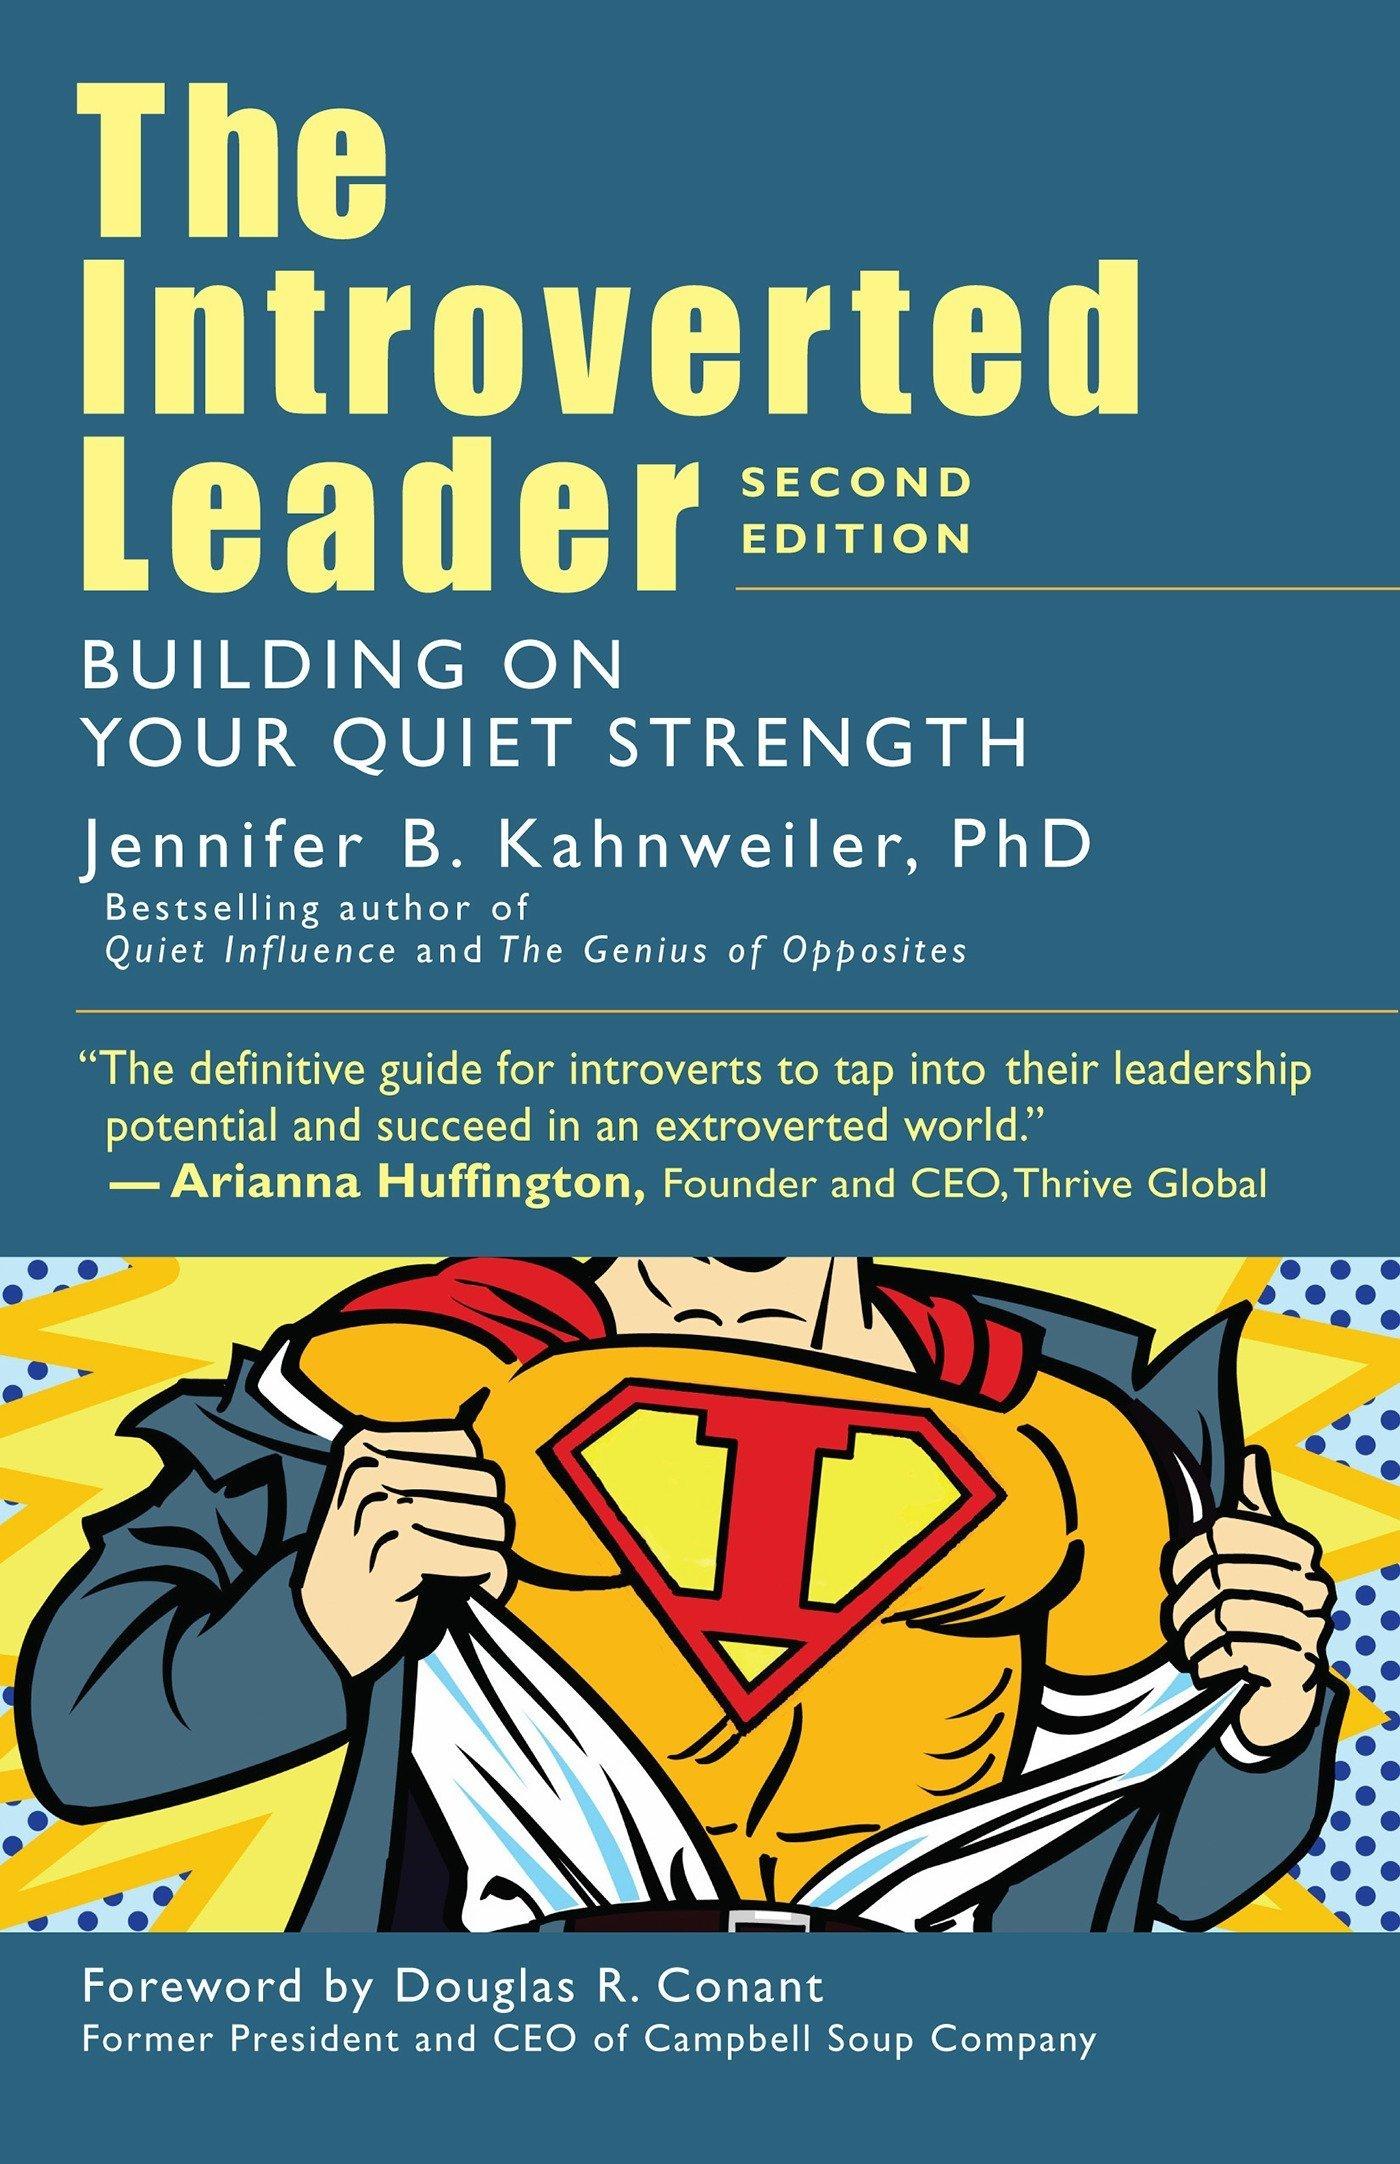 the introverted leader building on your quiet strength 1st edition jennifer b. kahnweiler, douglas r. conant